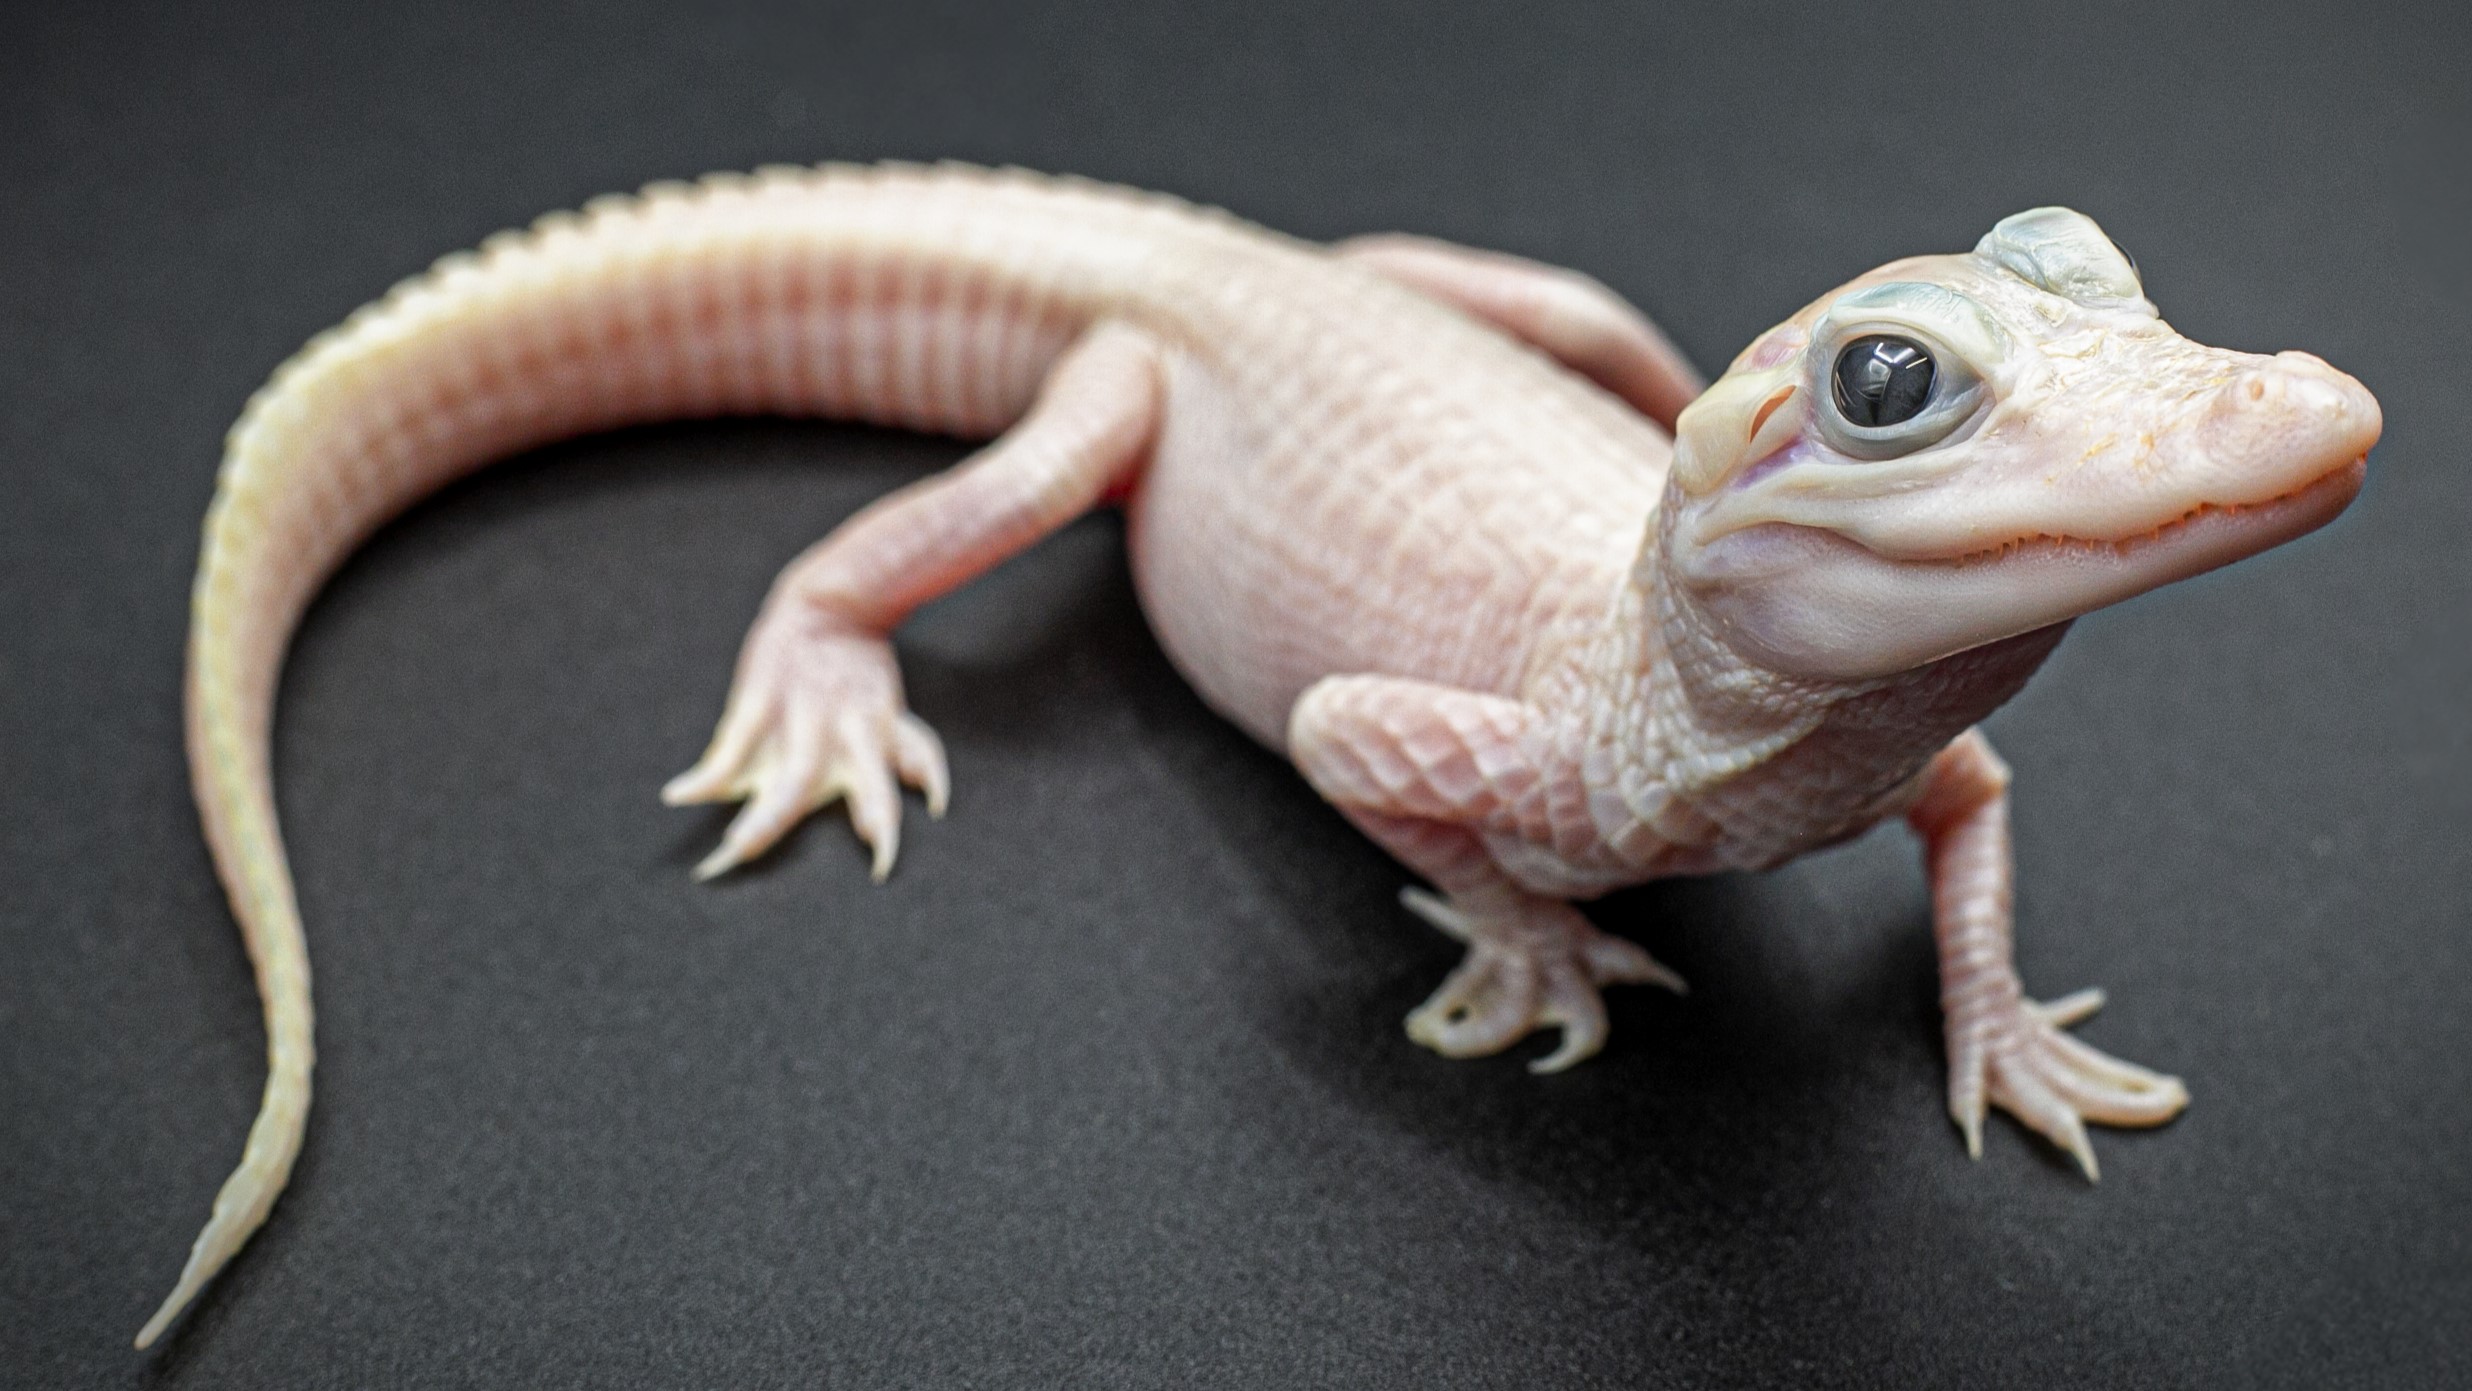 A leucistic alligator with pink skin and blue eyes looks at a camera on a black background.